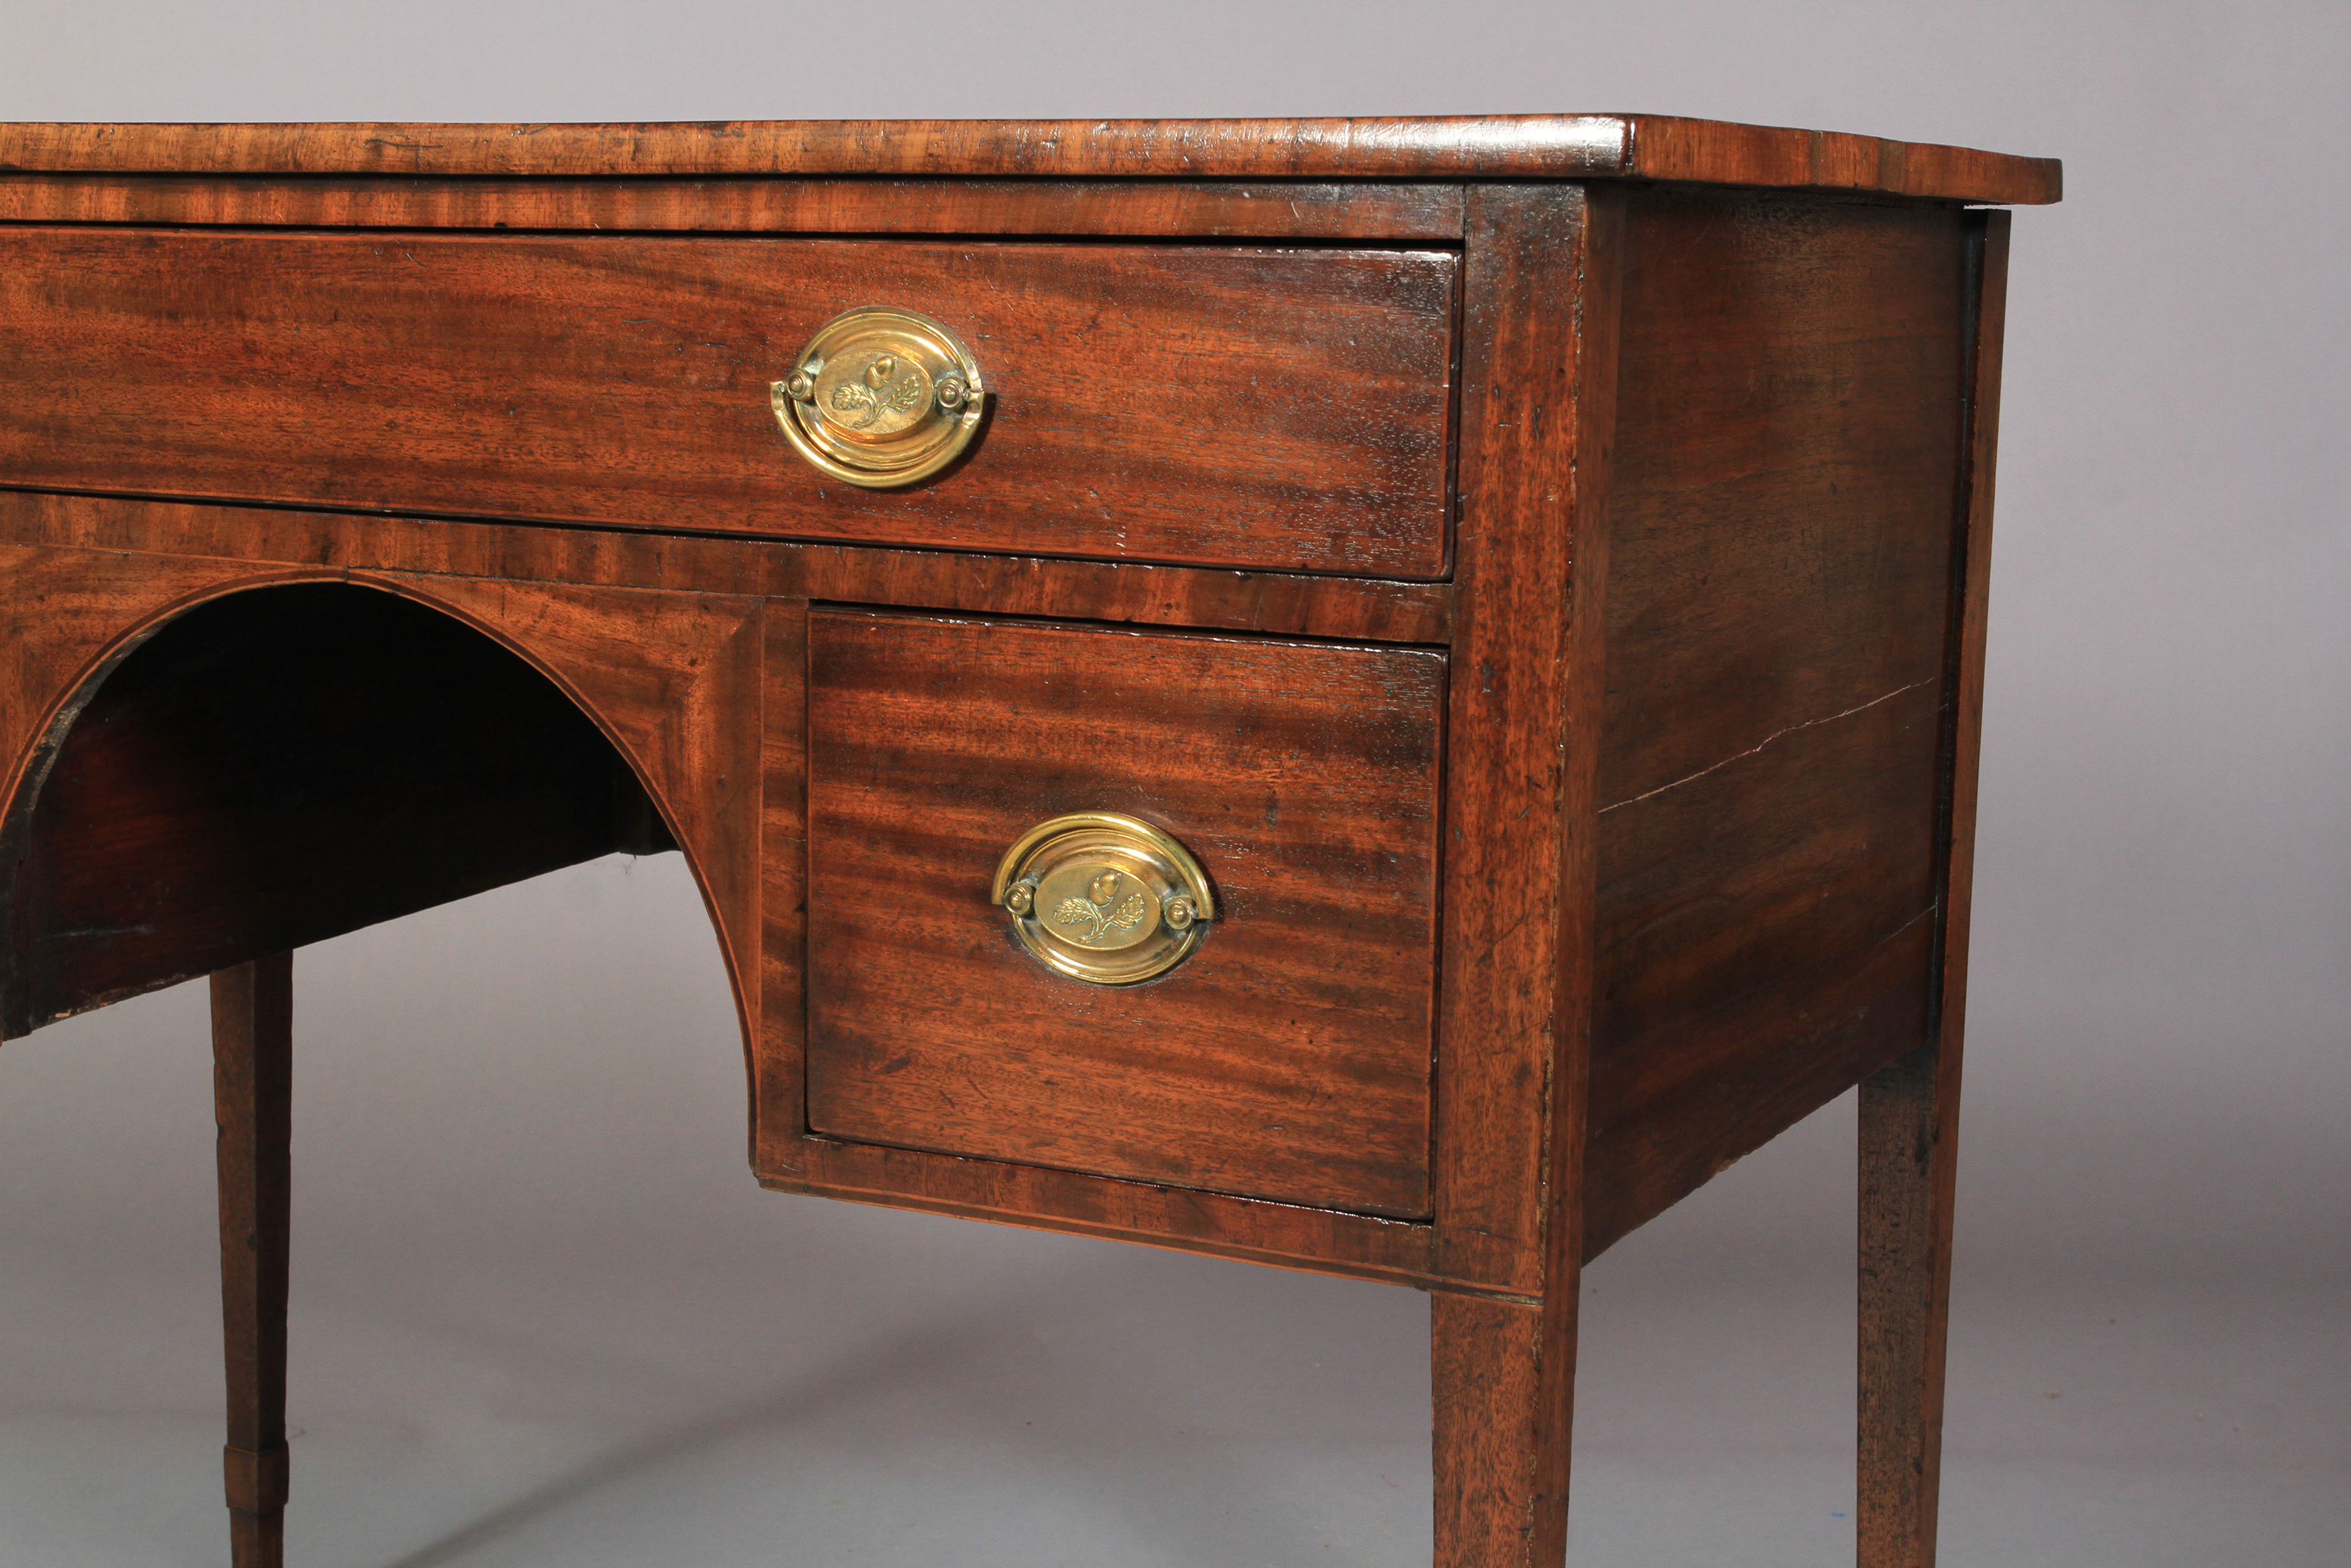 AN EARLY 19TH CENTURY MAHOGANY SIDE TABLE, having a drawer across above an arched apron flanked by a - Image 3 of 3